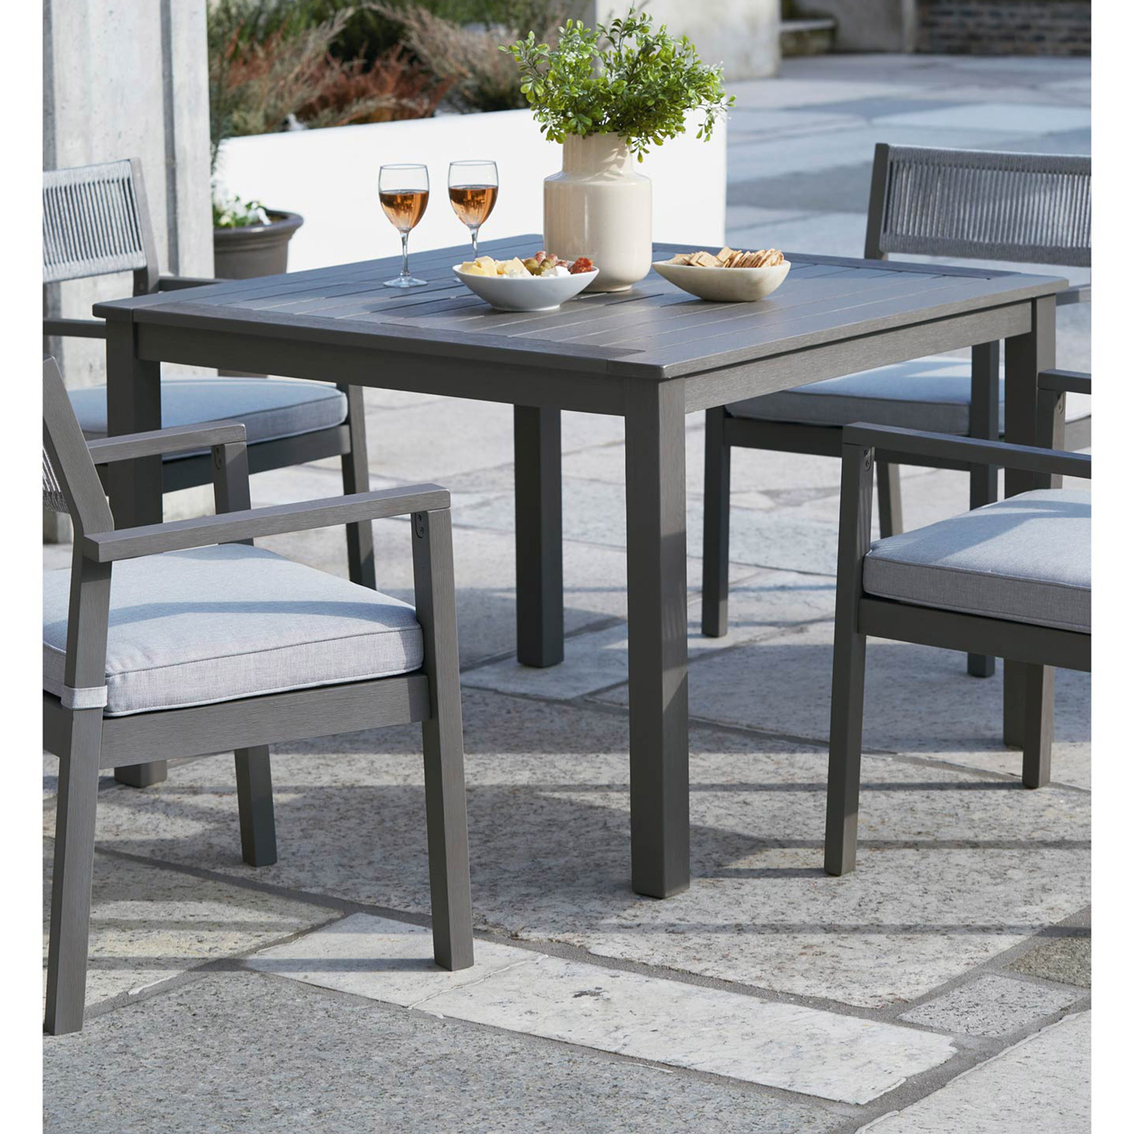 Signature Design by Ashley Eden Town Outdoor Dining 5 pc. Set - Image 7 of 7